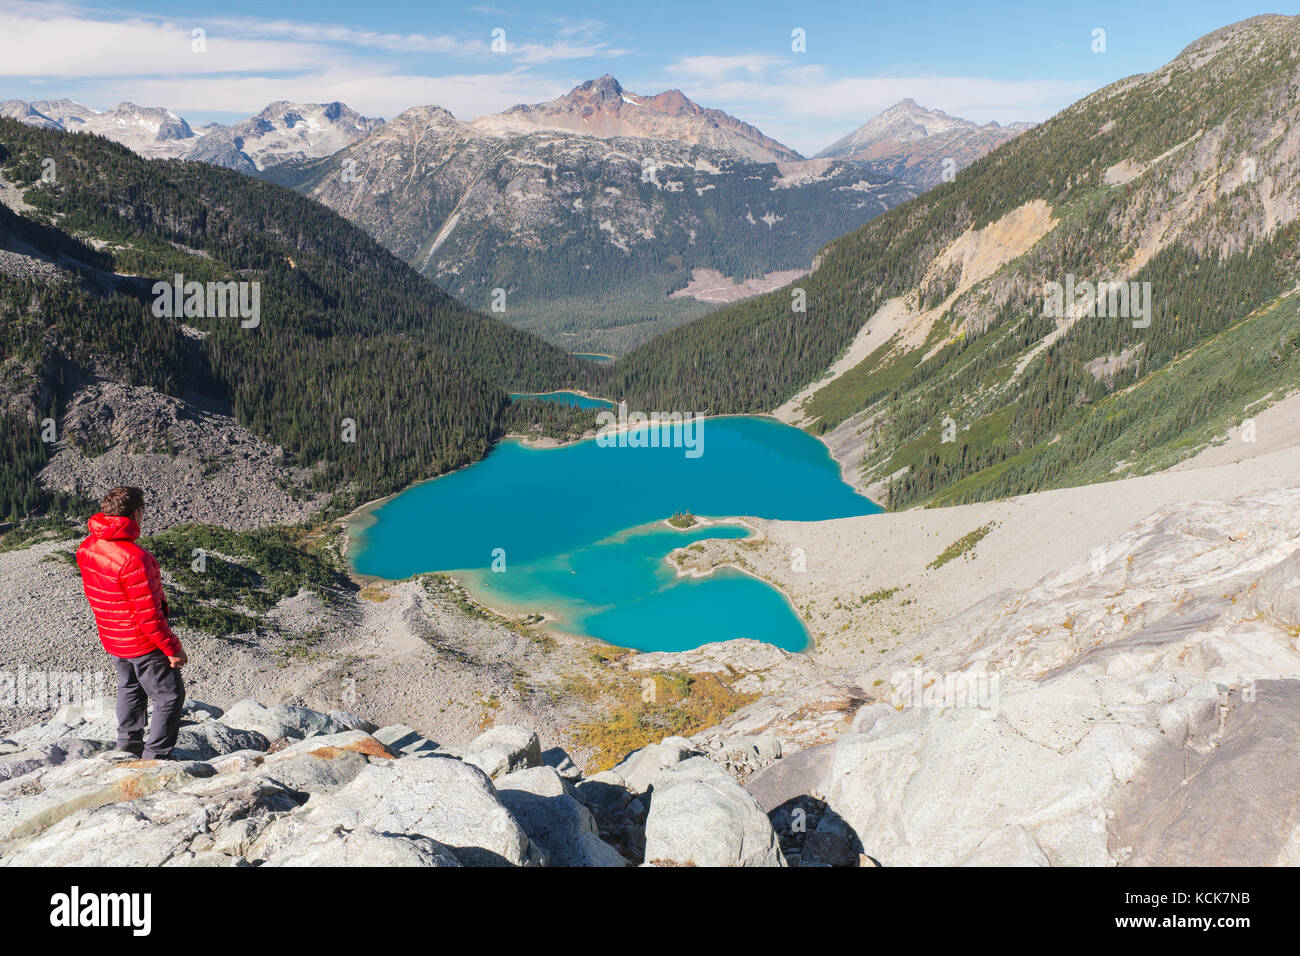 Hiker overlooking the three lakes at Joffre Lakes provincial park, British Columbia, Canada. Stock Photo